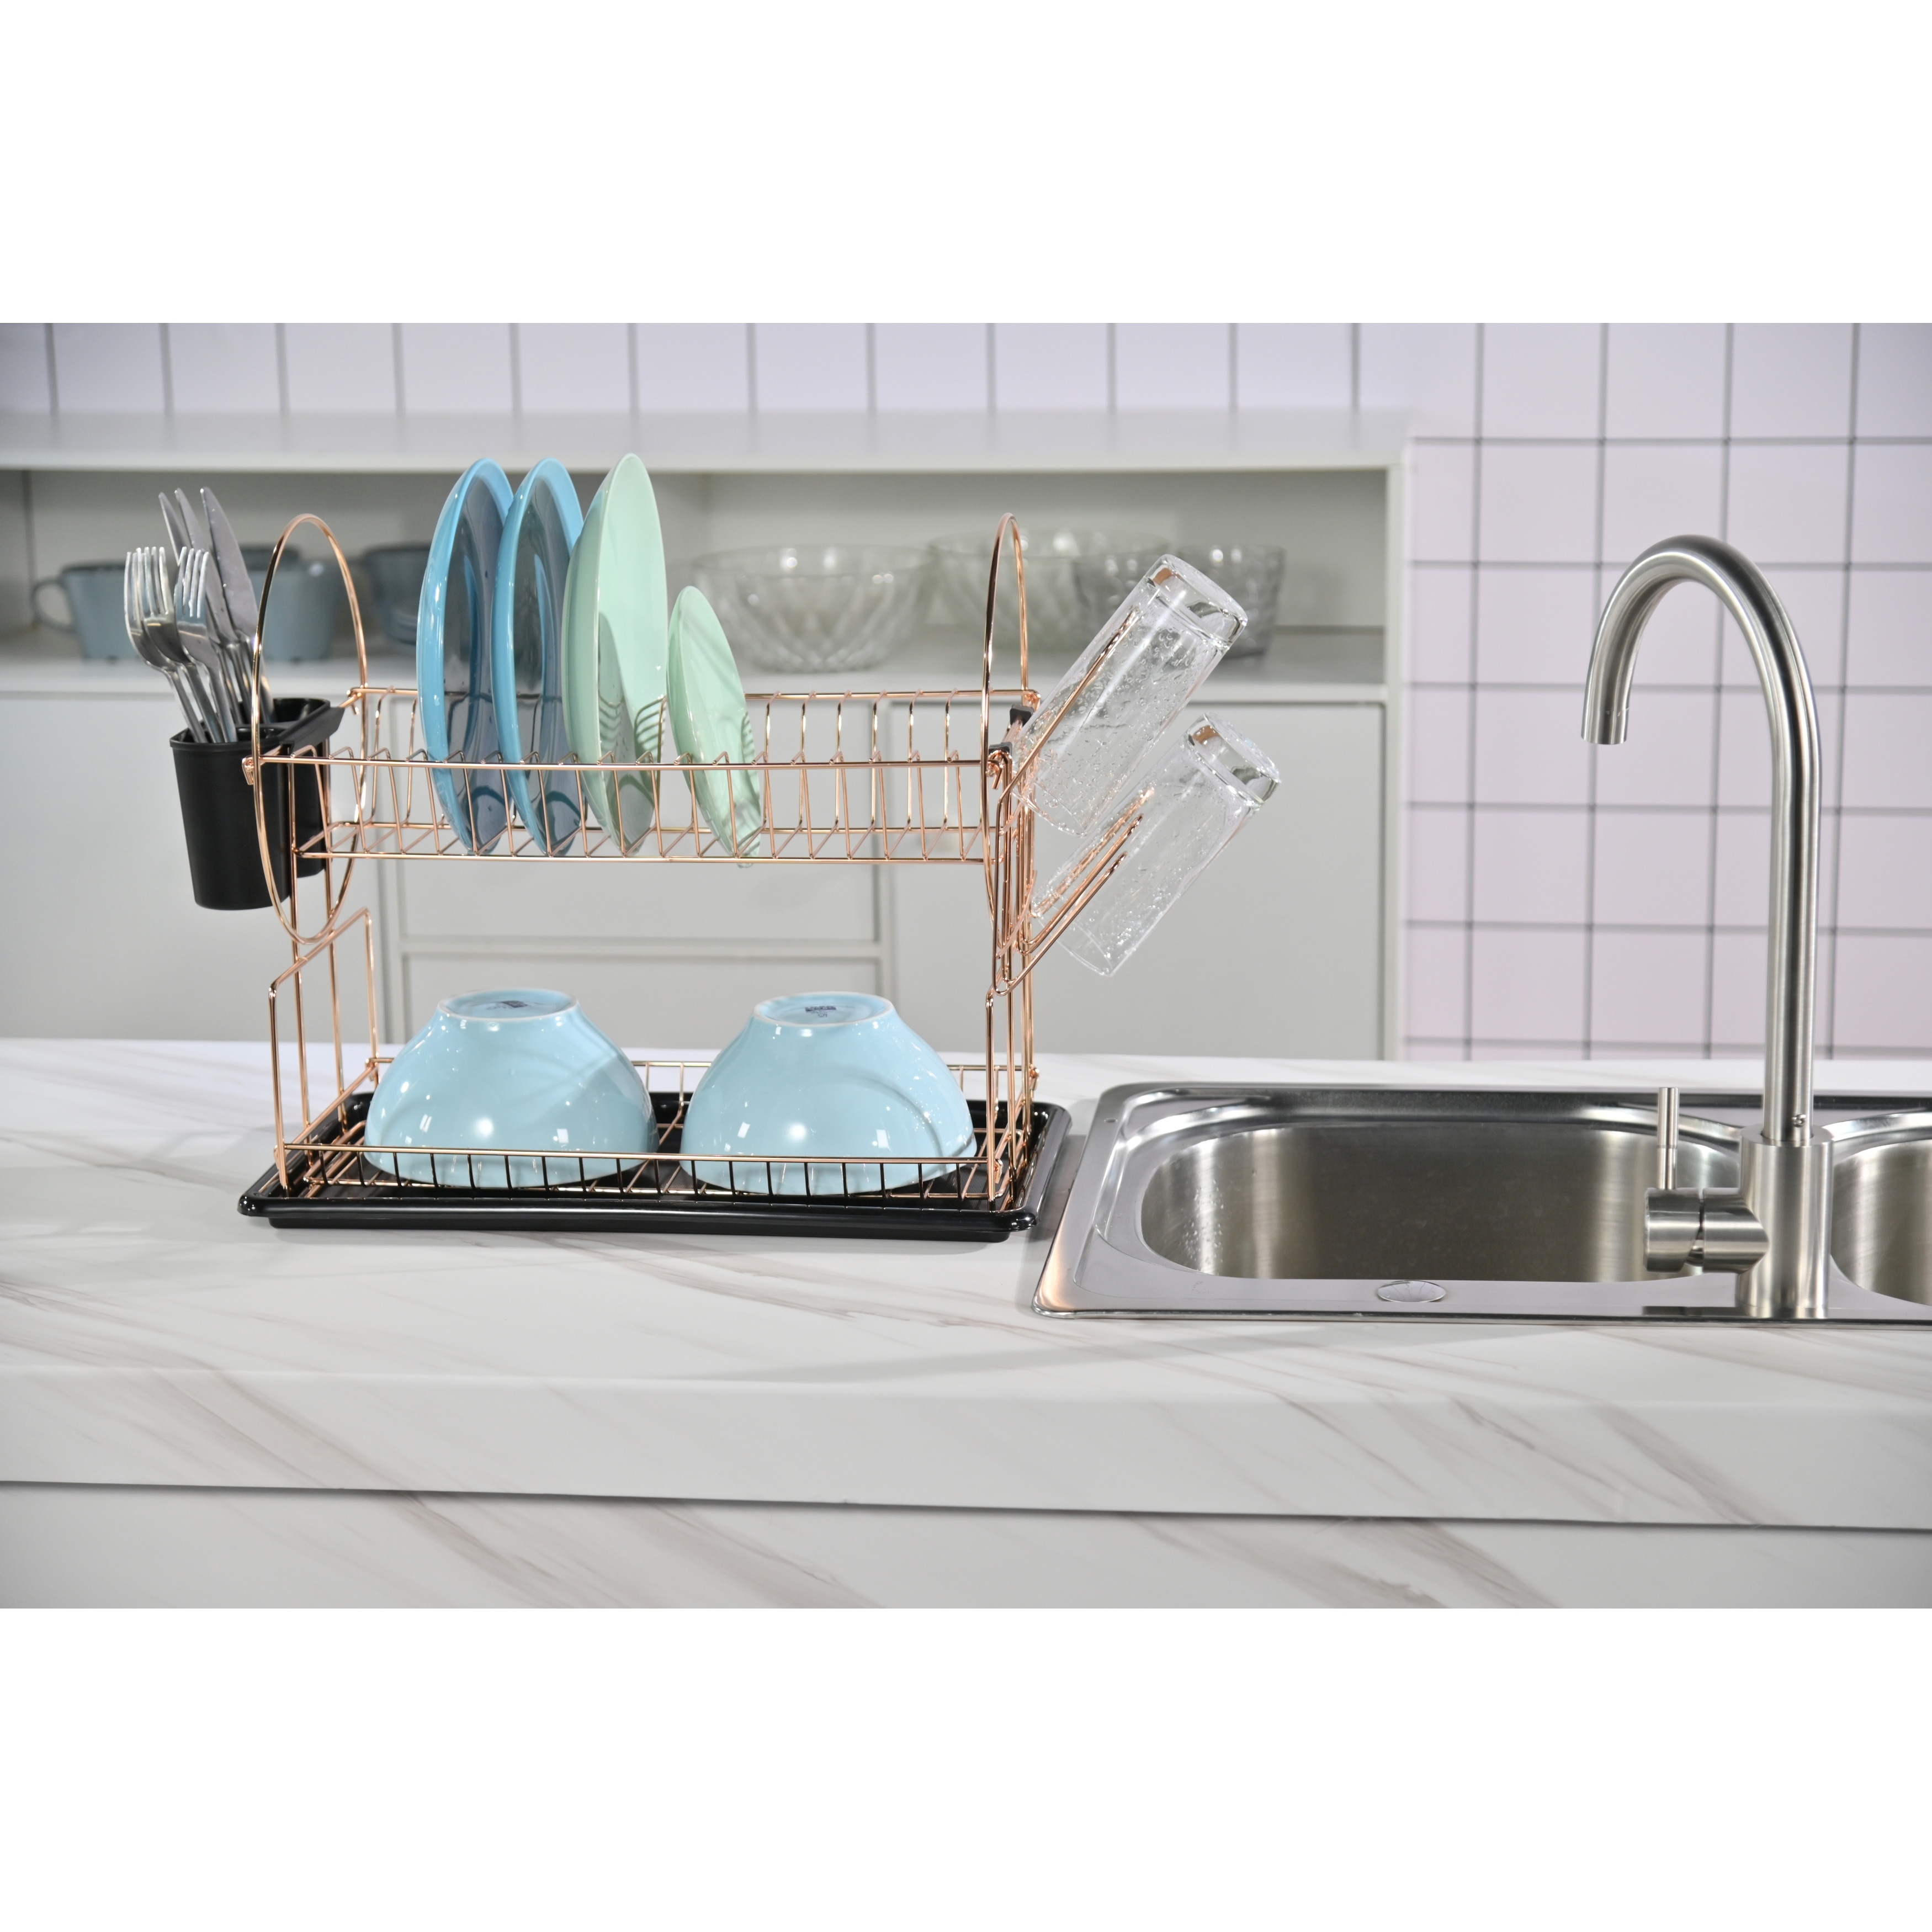 https://ak1.ostkcdn.com/images/products/is/images/direct/40147ed52fa4e439deaf66684df345849bbcd89e/Jiallo-Stainless-Steel-2-Tier-dish-rack-with-dripping-tray-%28Rose-Gold%29.jpg